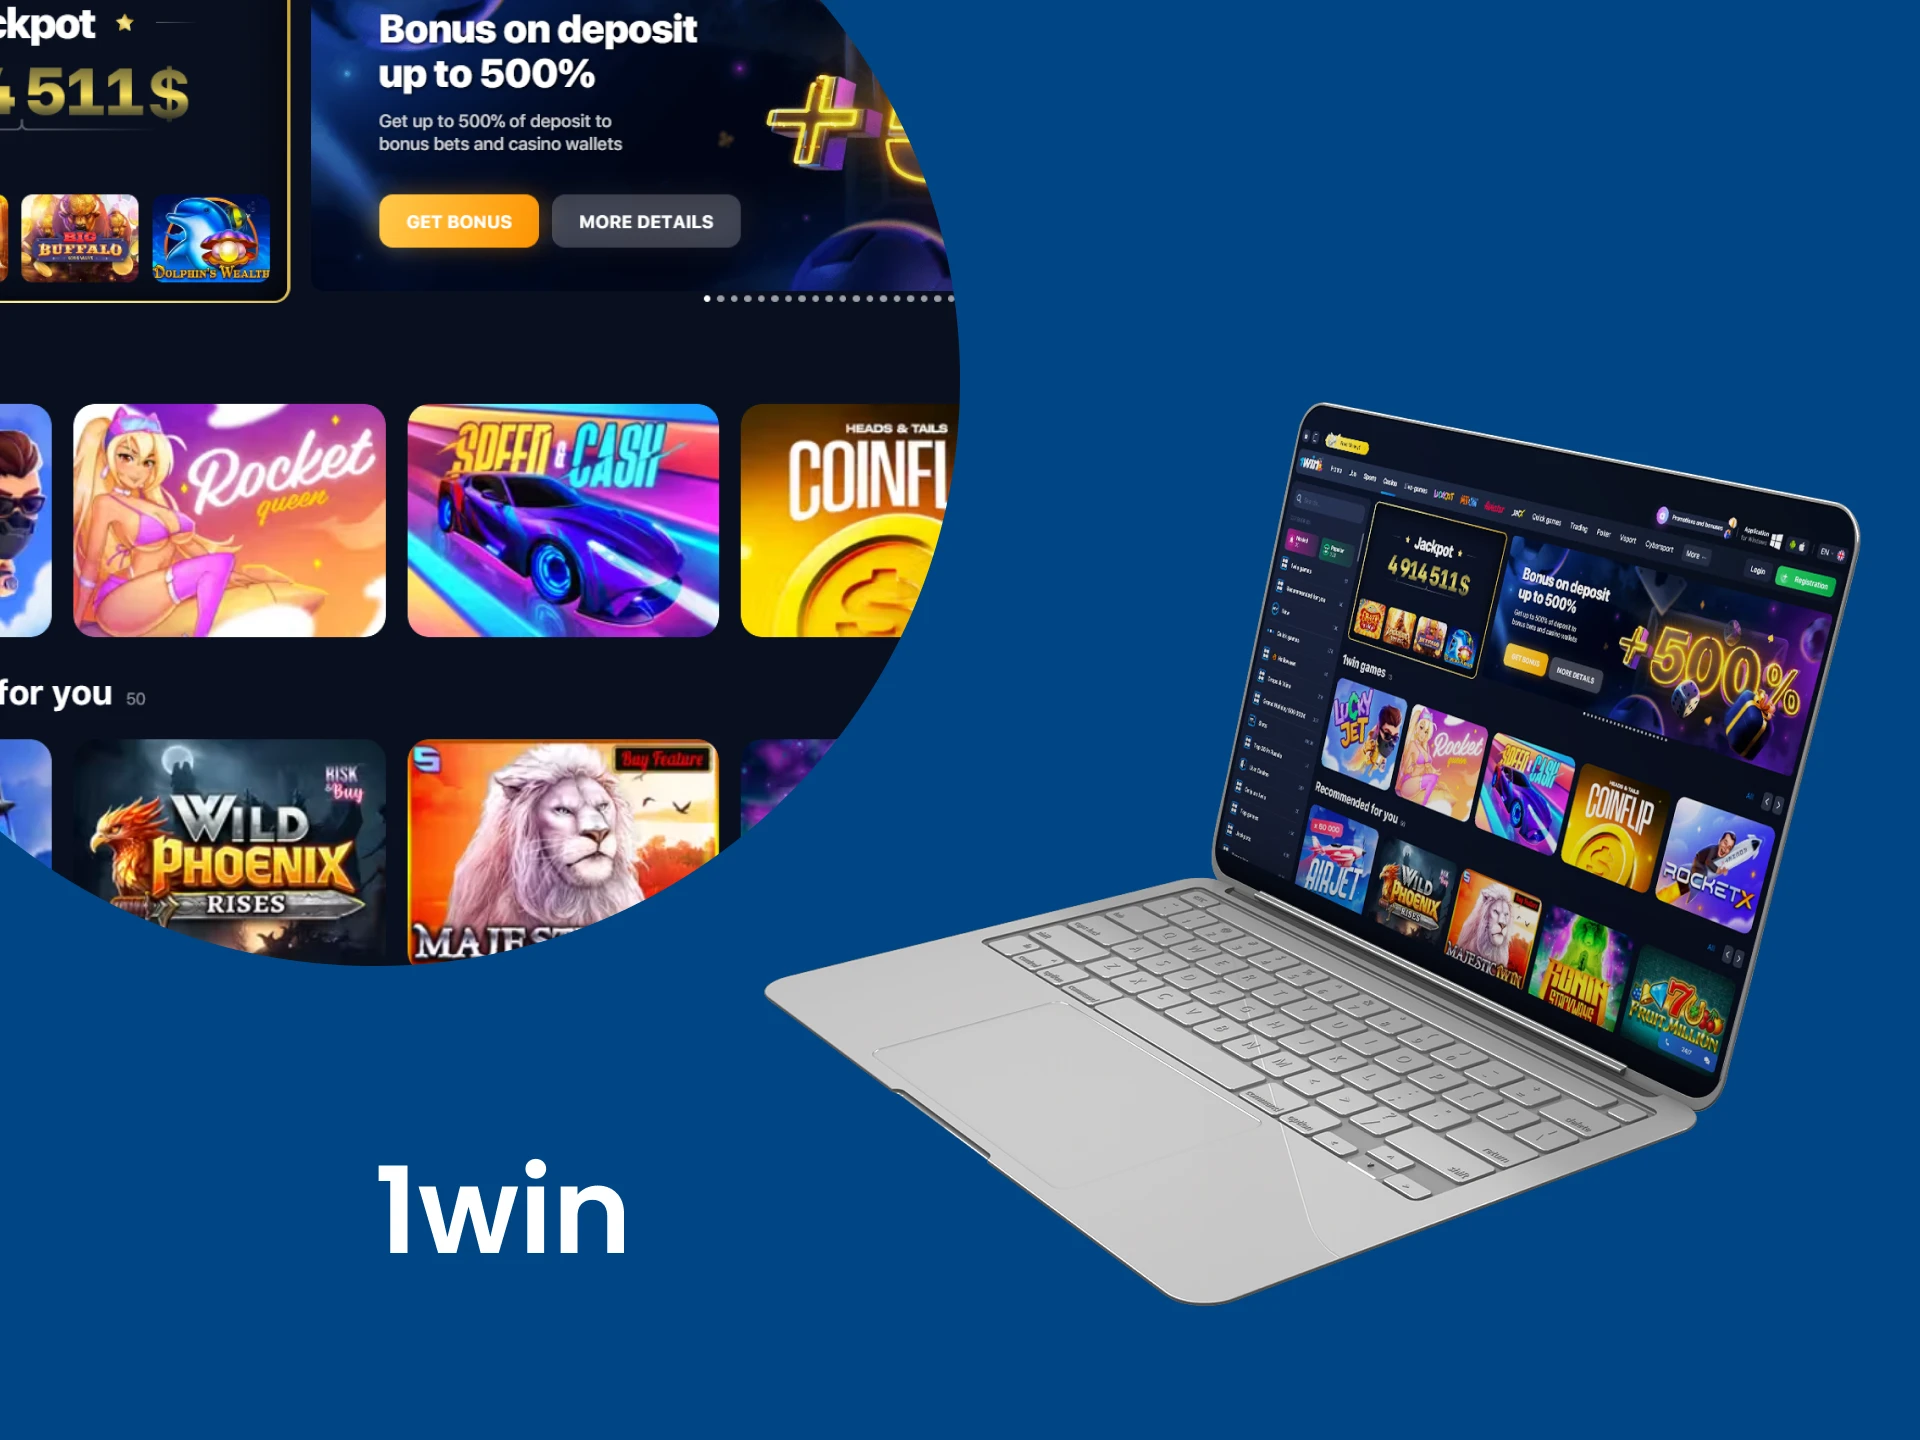 Try your hand at the online casino from 1win.